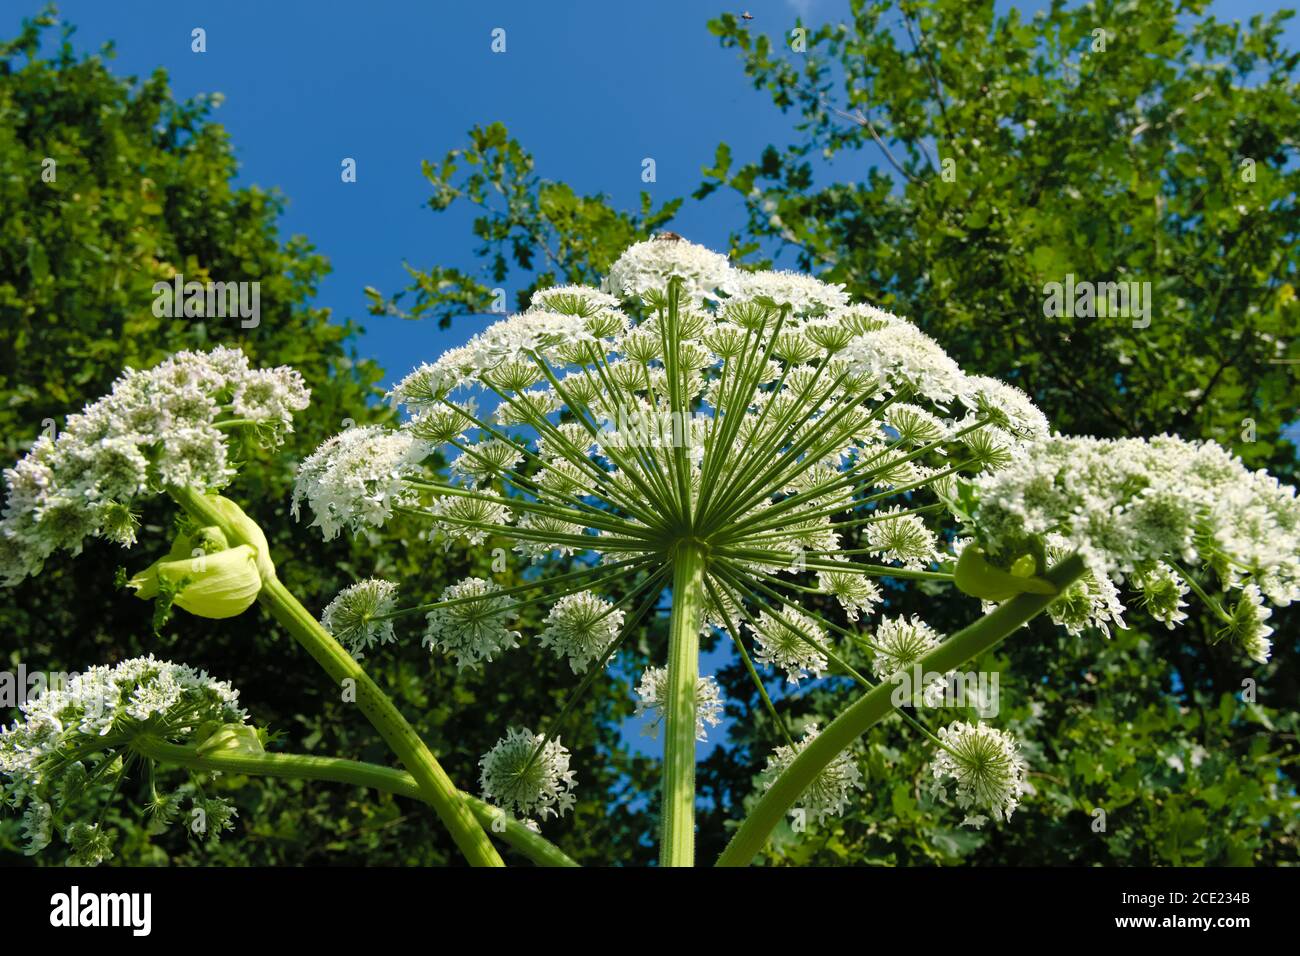 Flowers of a giant Hogweed, scientific name Heracleum mantegazzianum Stock Photo